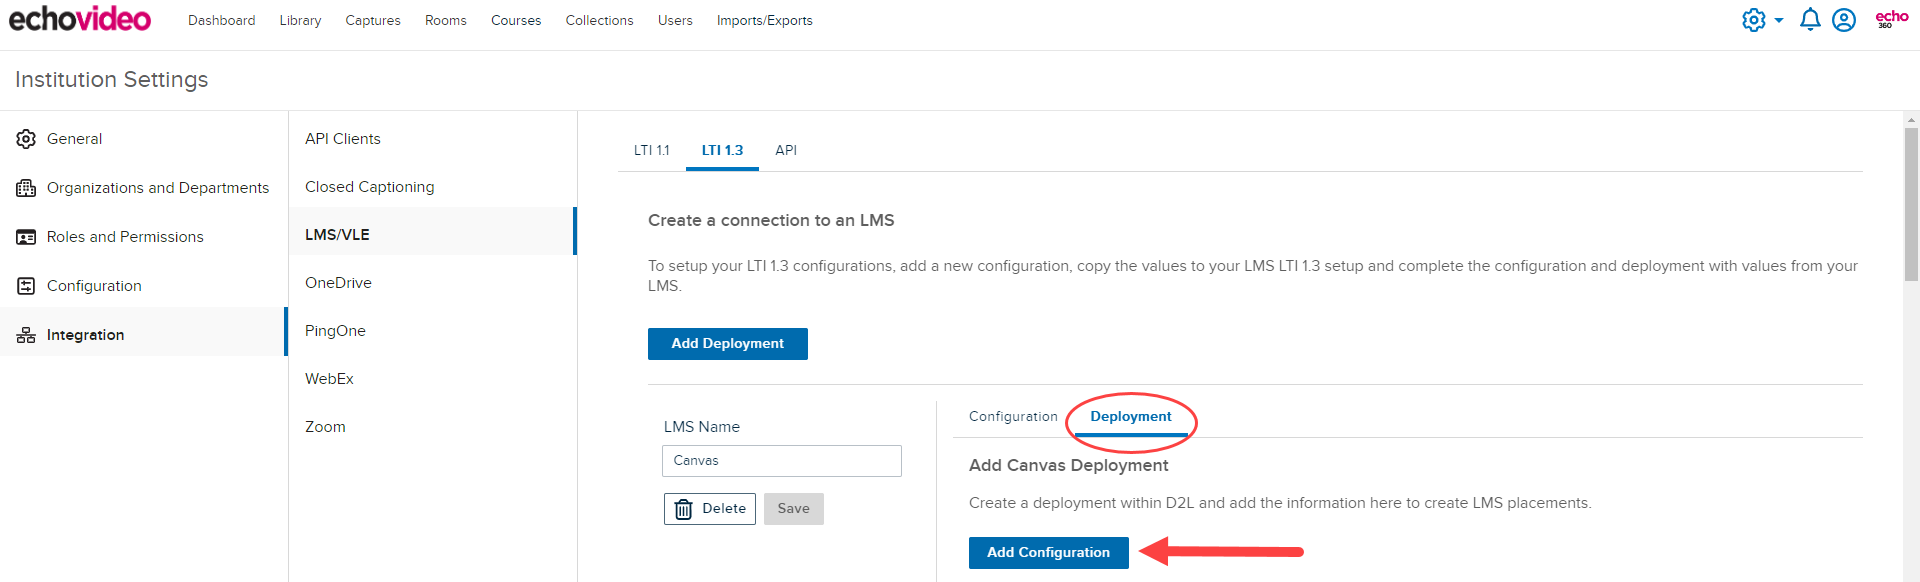 Add Configuration for relevant LTI 1.3 steps as described